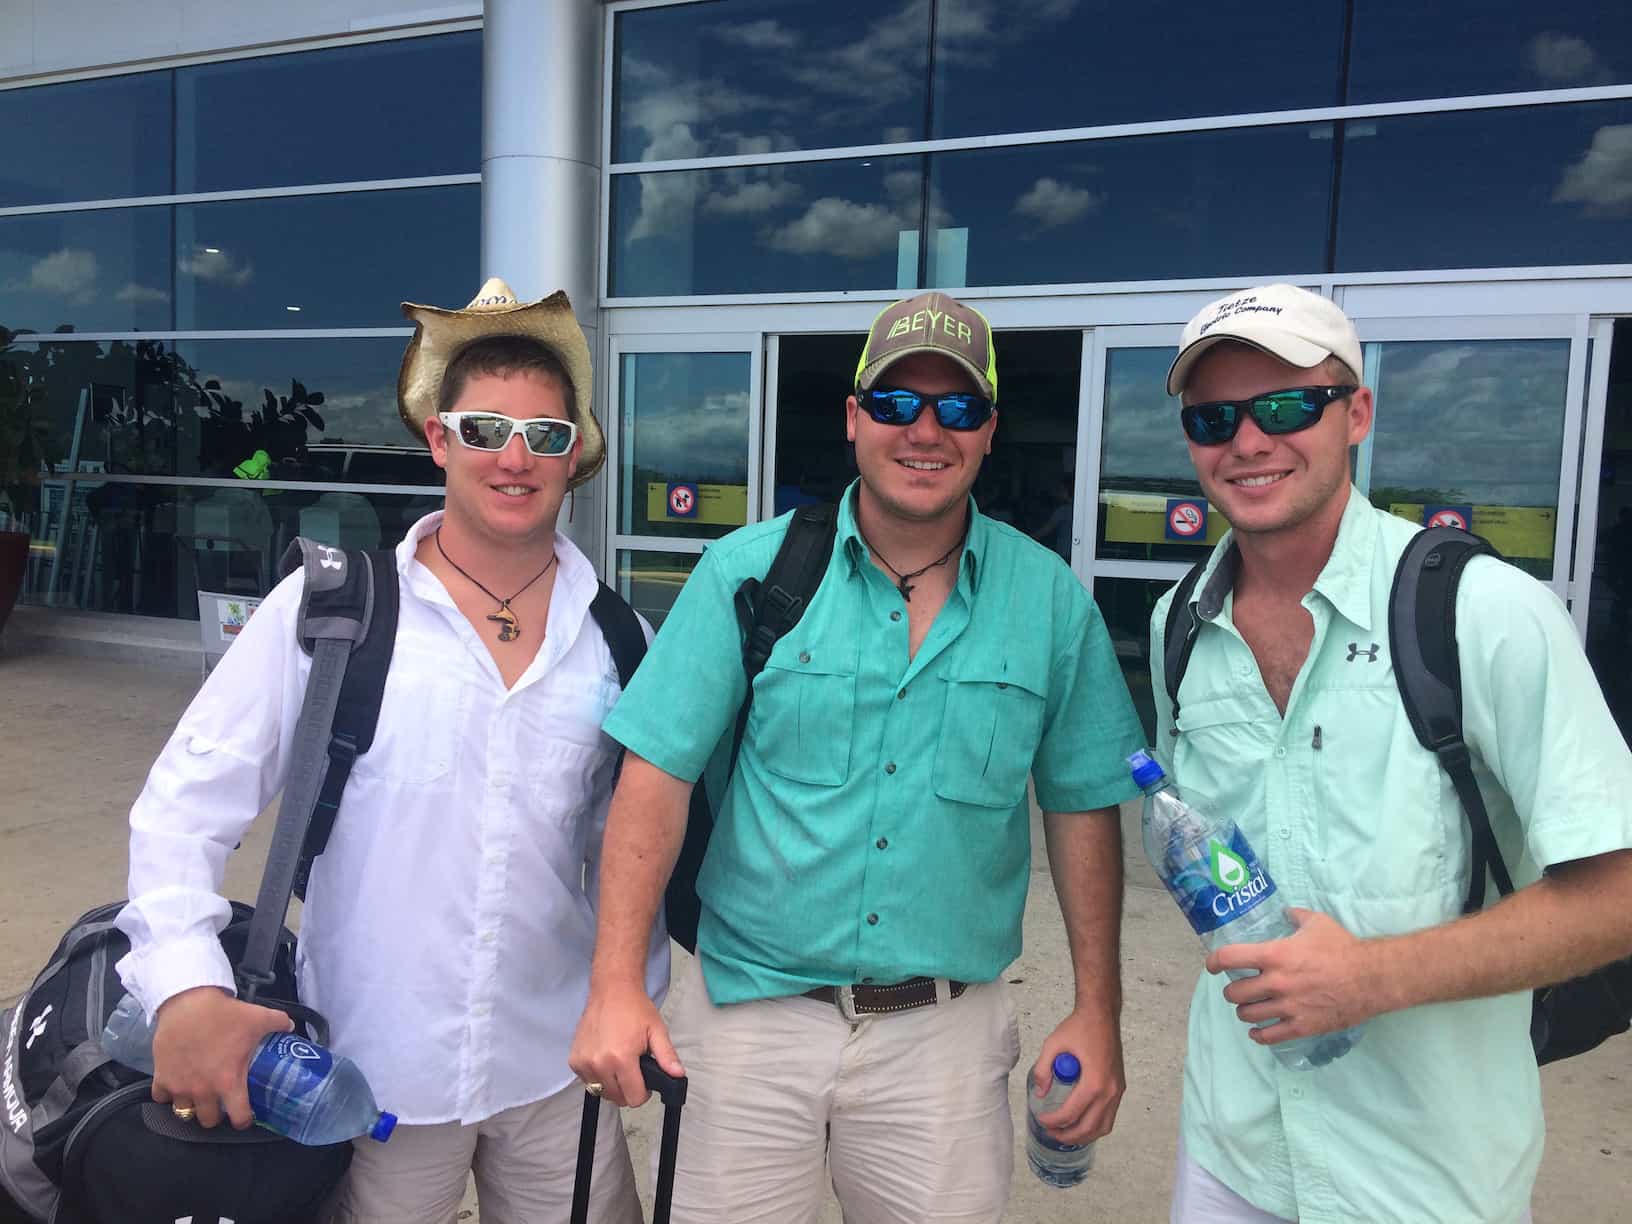 Arriving at Liberia airport in Costa Rica for our sportfishing trip with Danny Crosby